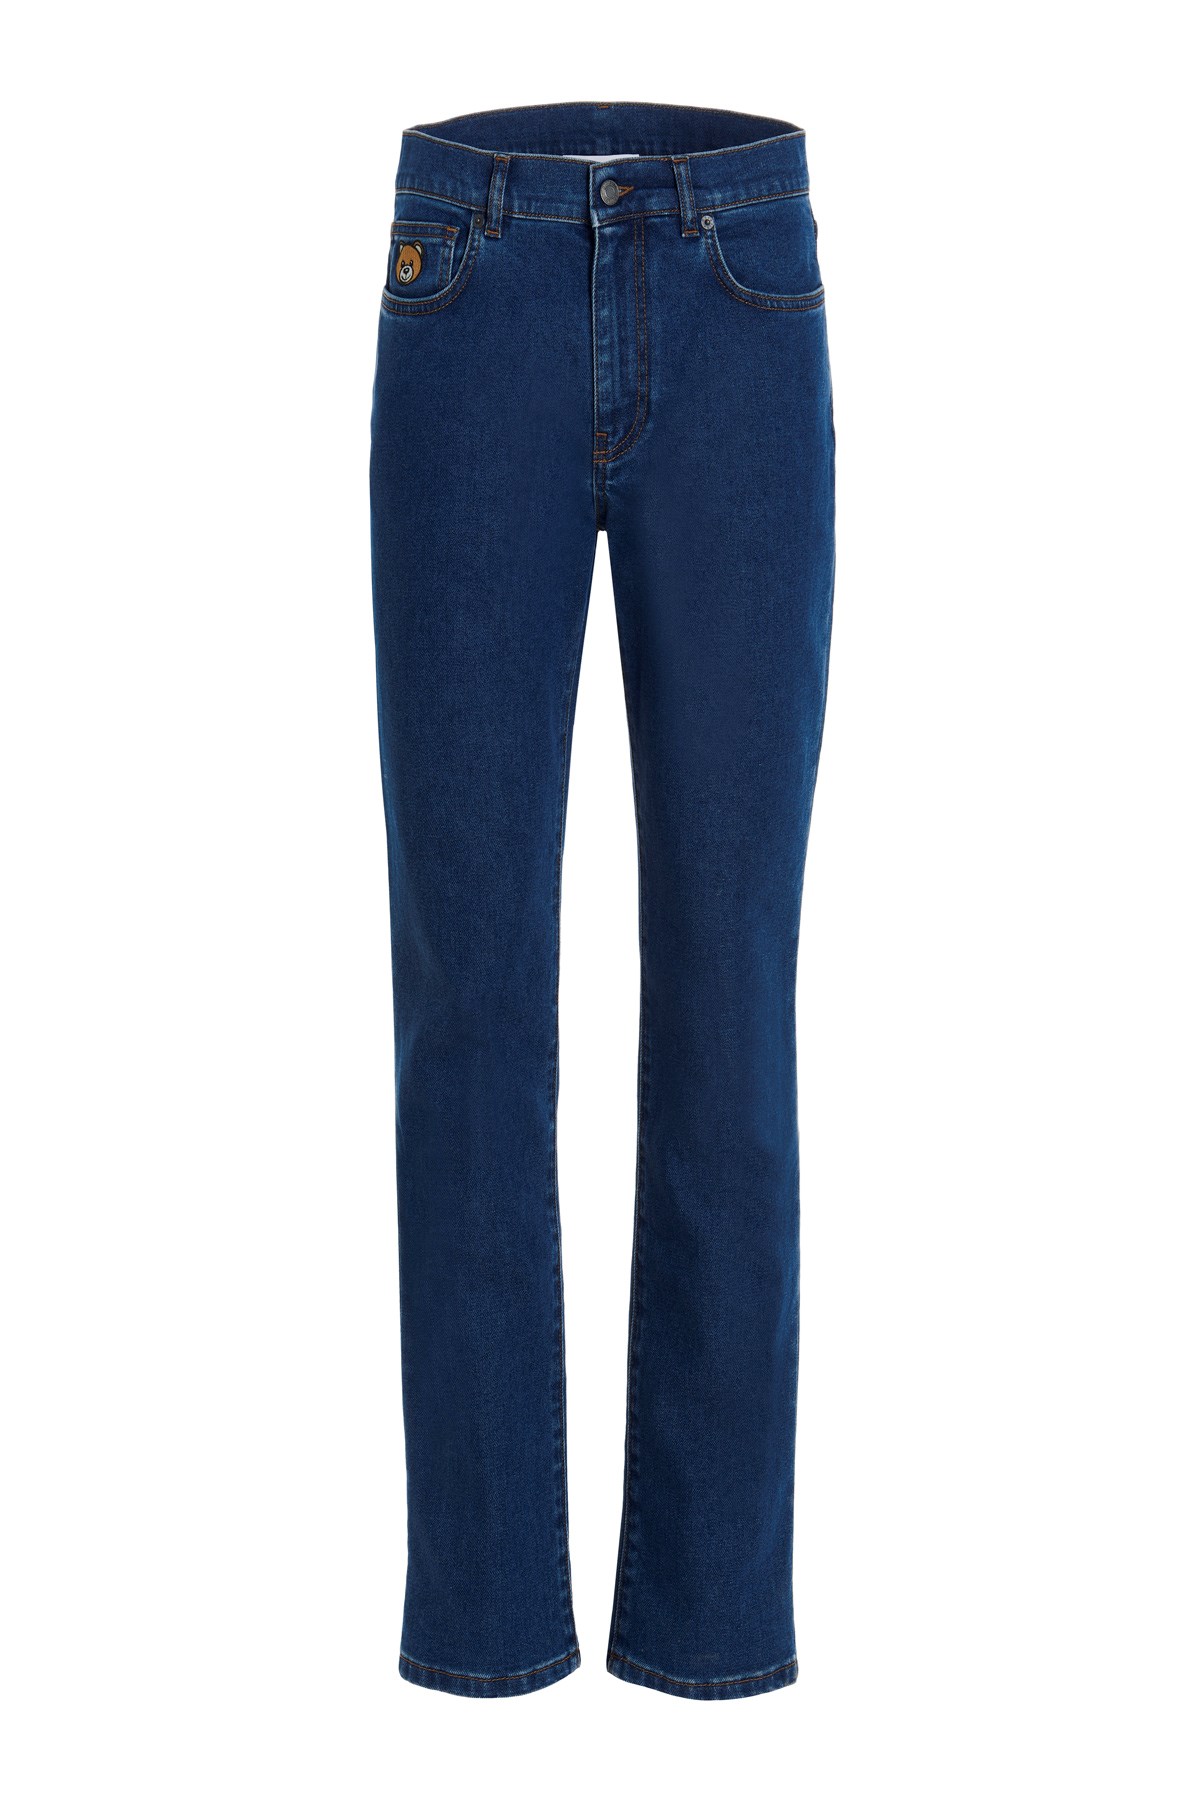 MOSCHINO Jeans 'Teddy'